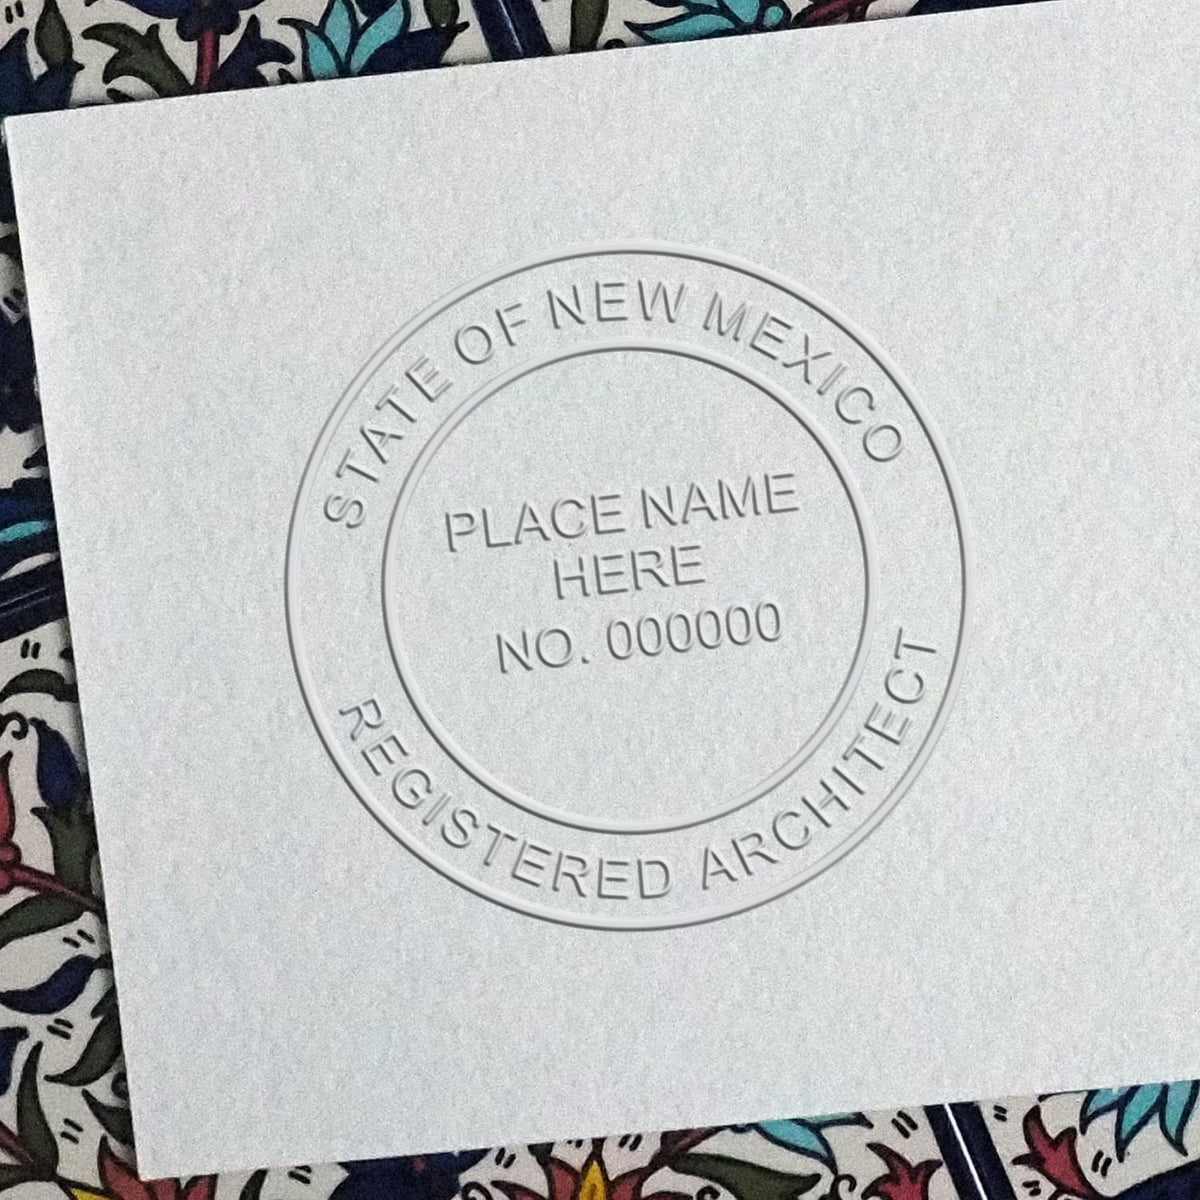 The Gift New Mexico Architect Seal stamp impression comes to life with a crisp, detailed image stamped on paper - showcasing true professional quality.